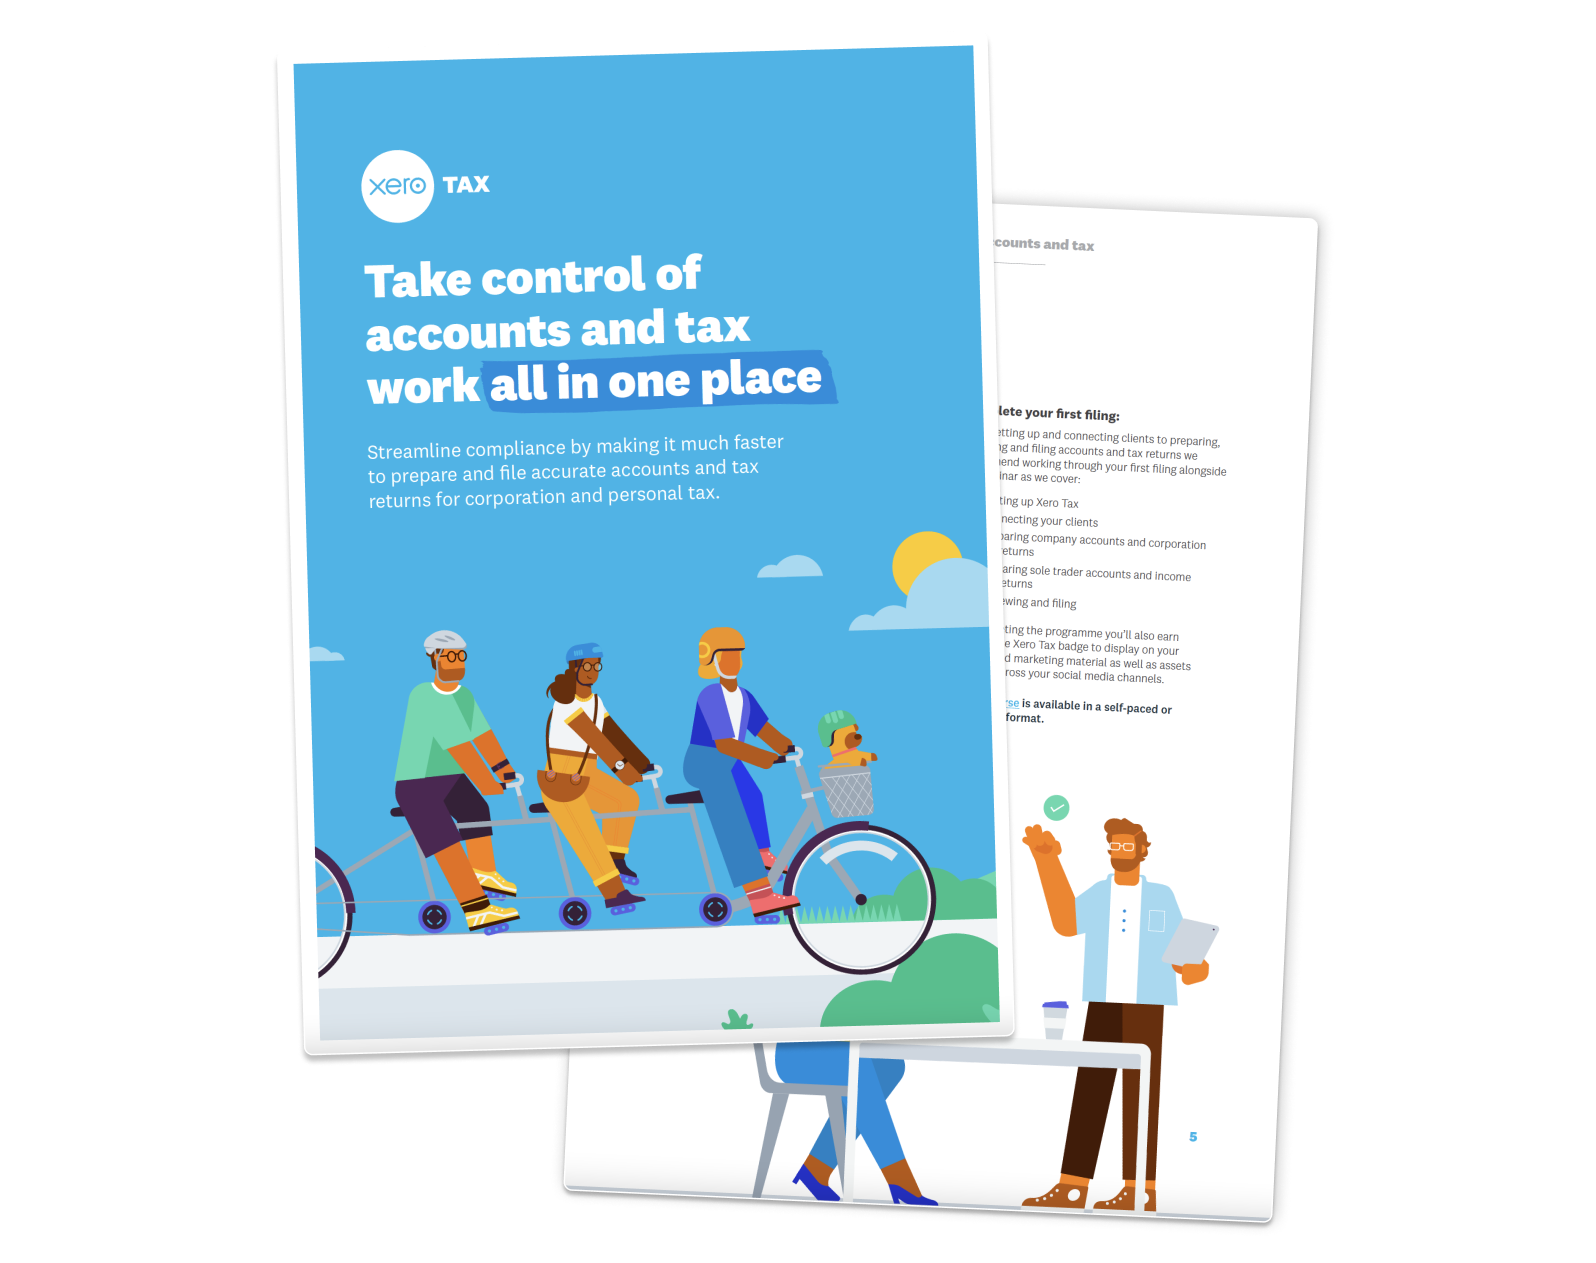 "Take control of accounts and tax work all in one place" guide.